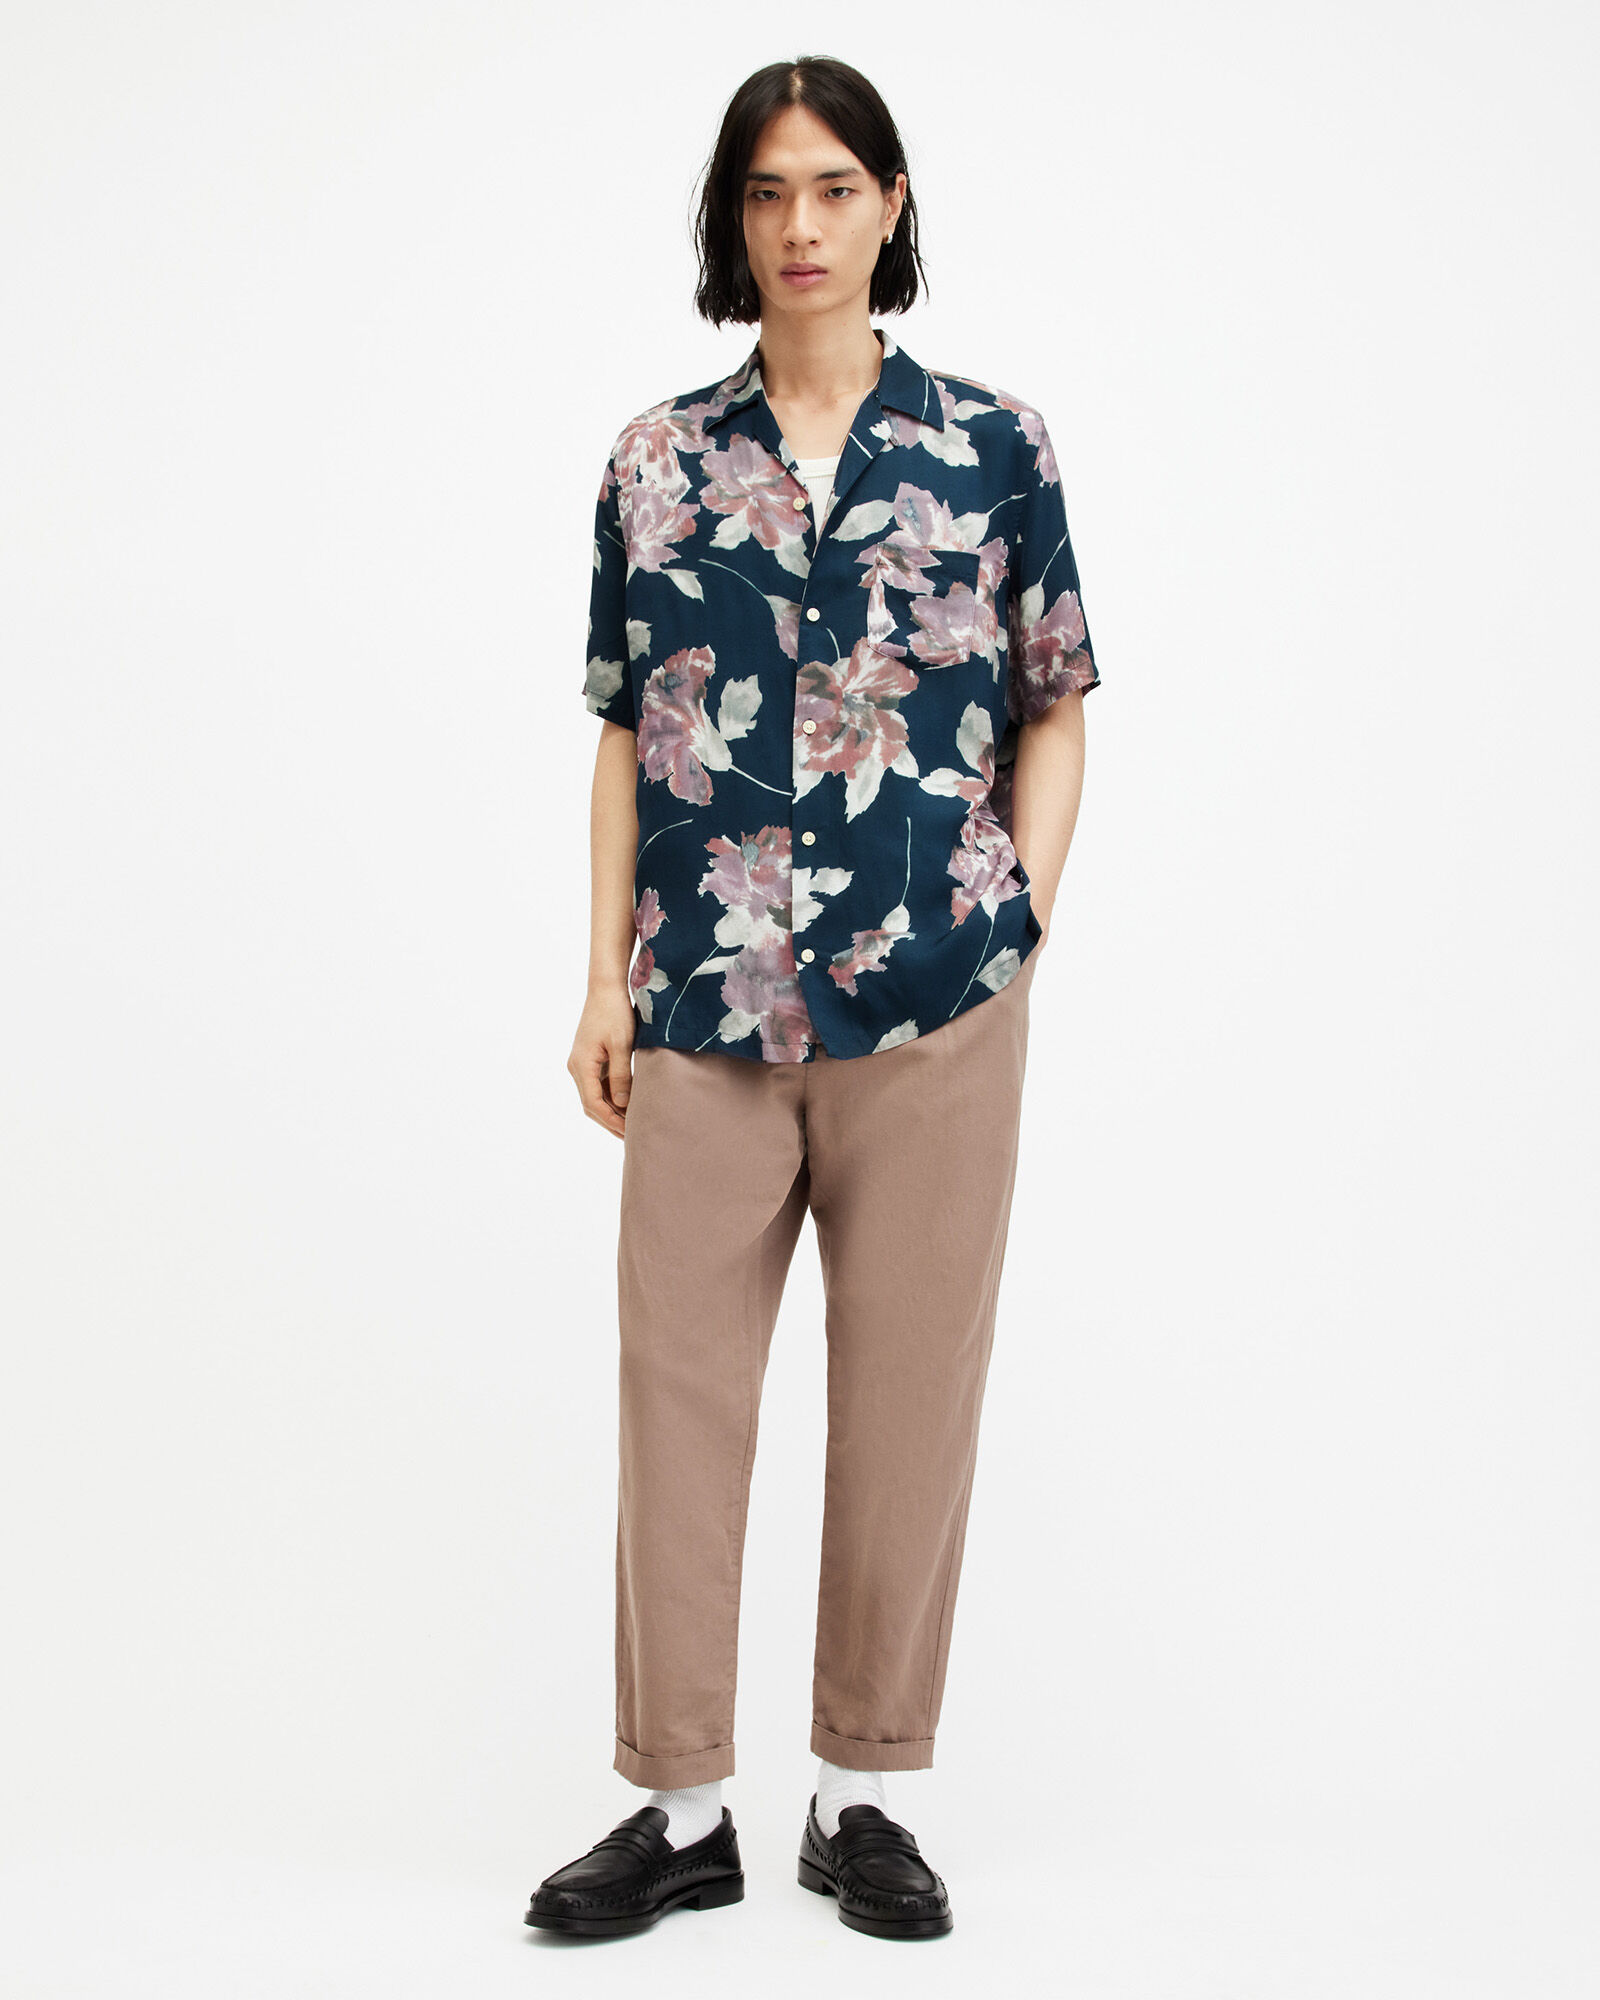 Zinnia Floral Print Relaxed Fit Shirt